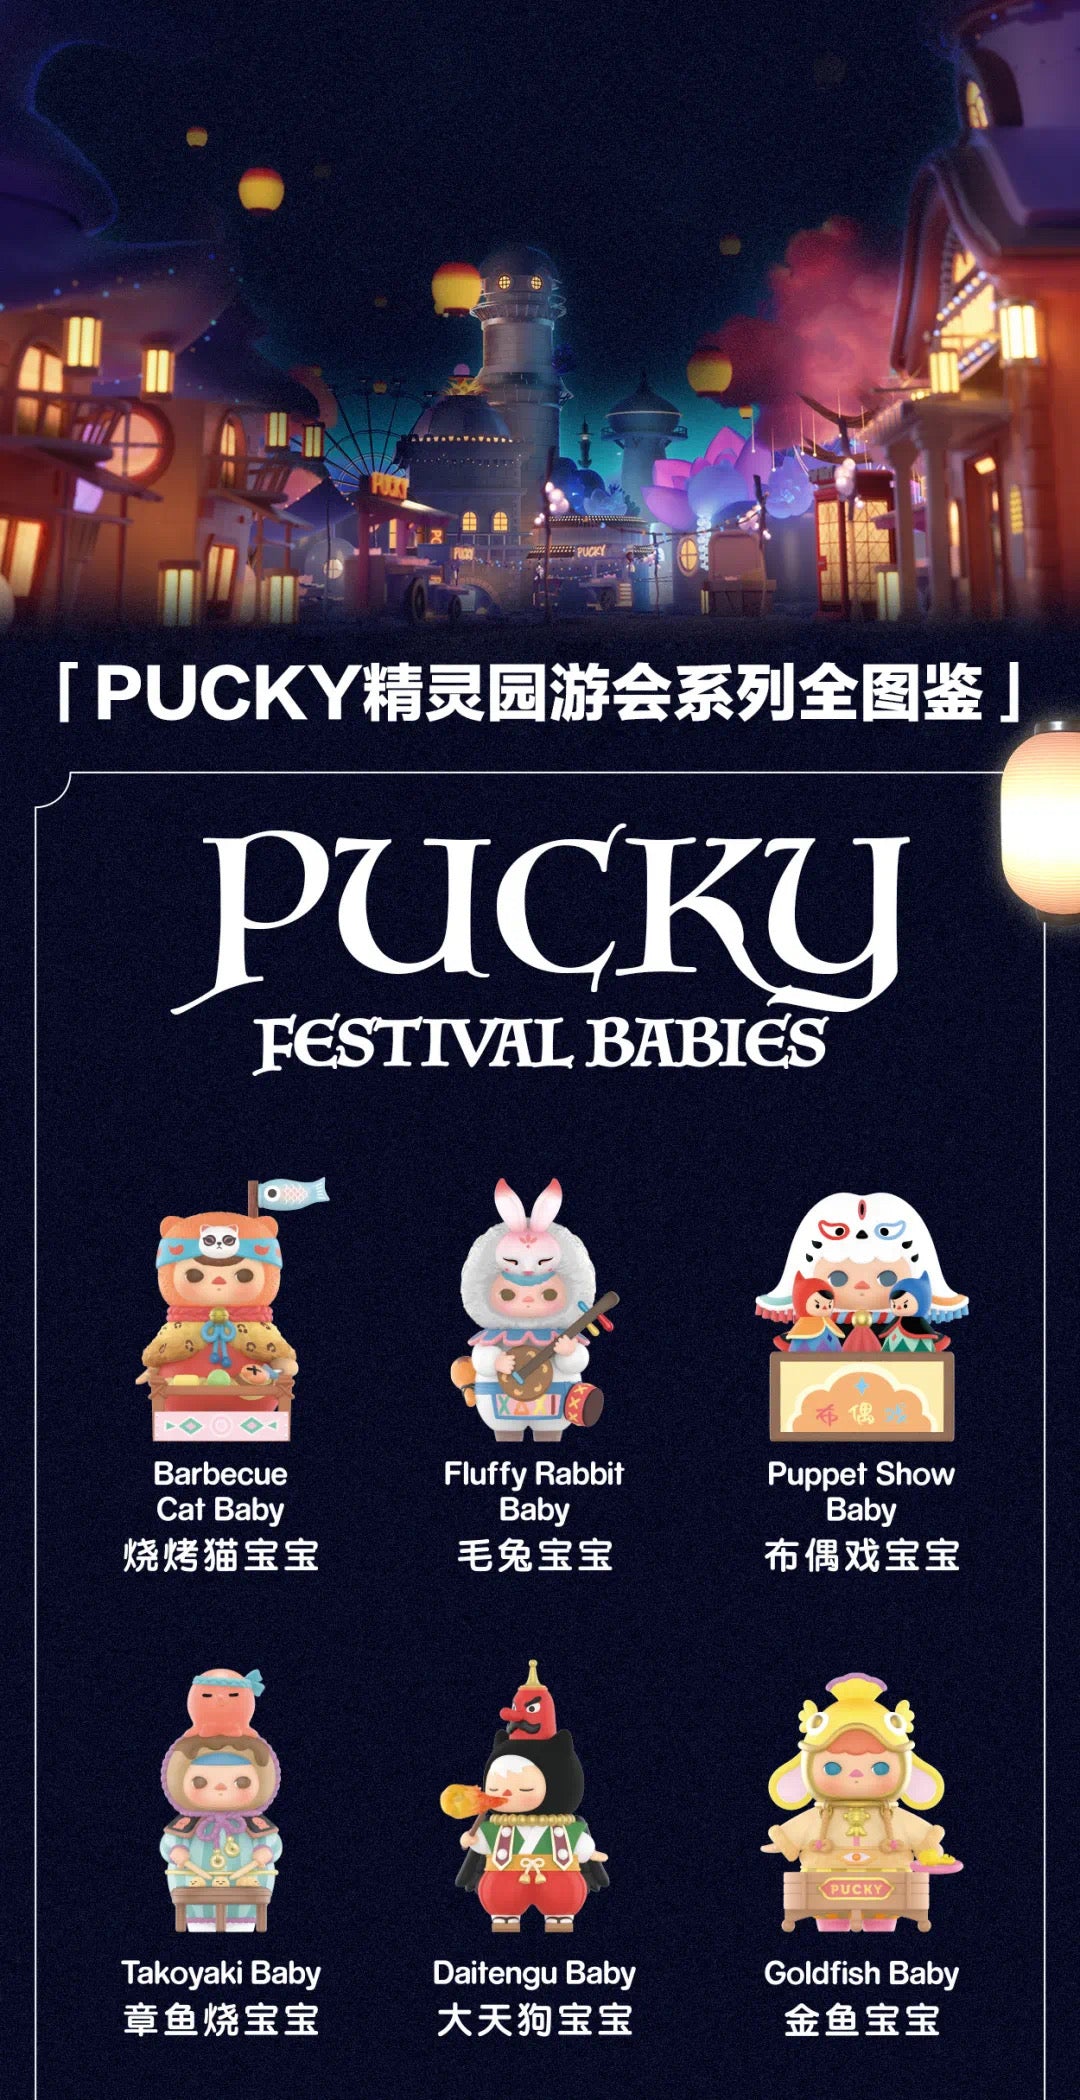 Pucky Festival Babies Blind Box Series